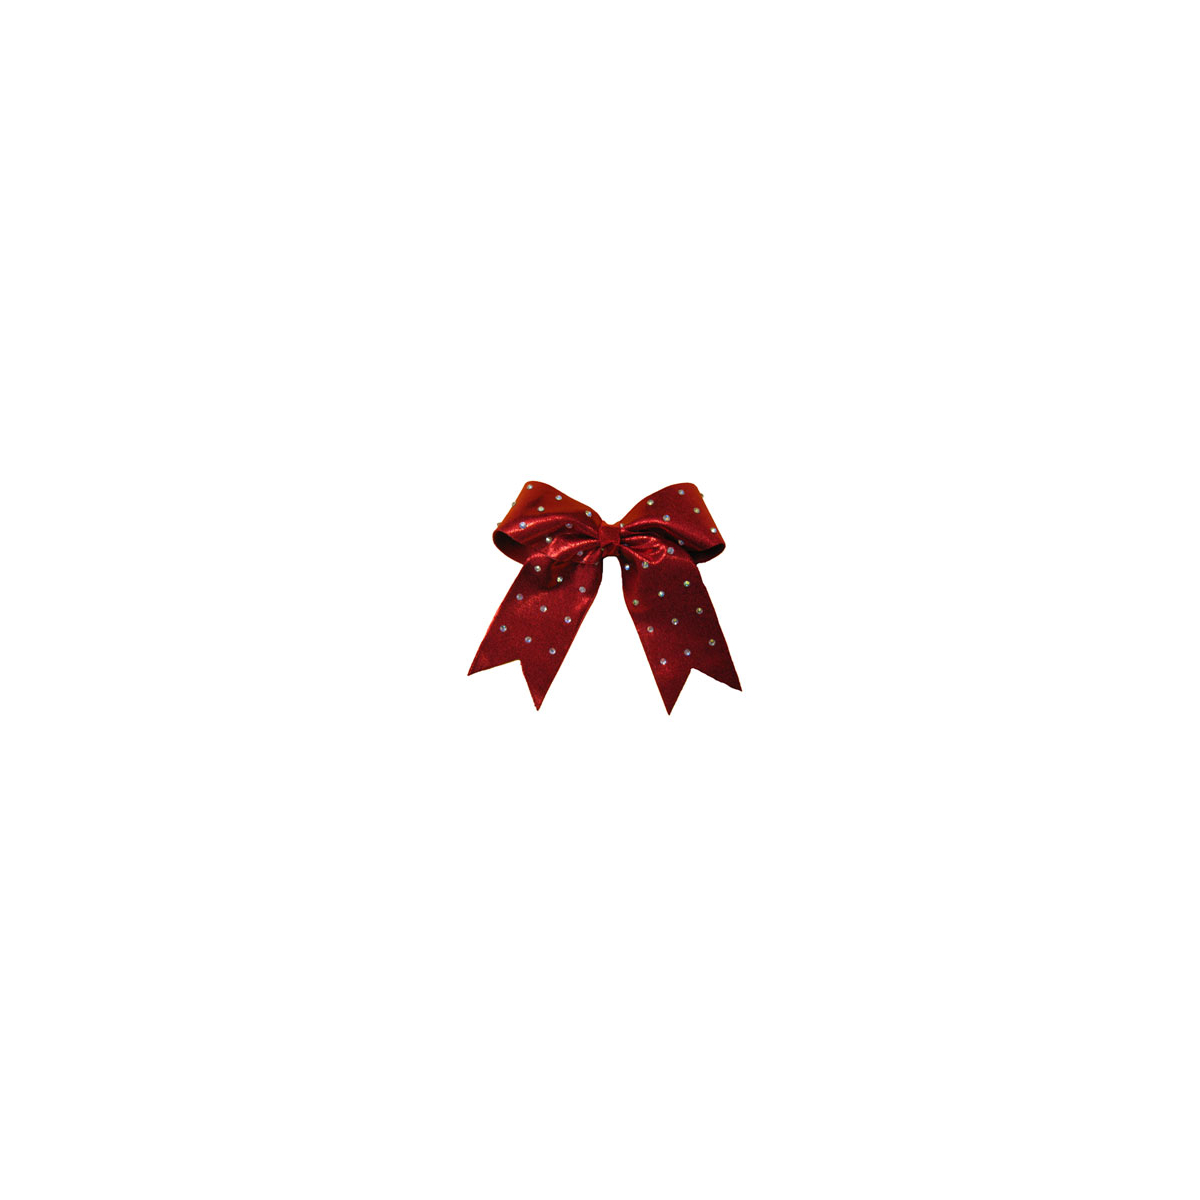 Large Custom Specialty Material Bow with Rhinestone Overlay